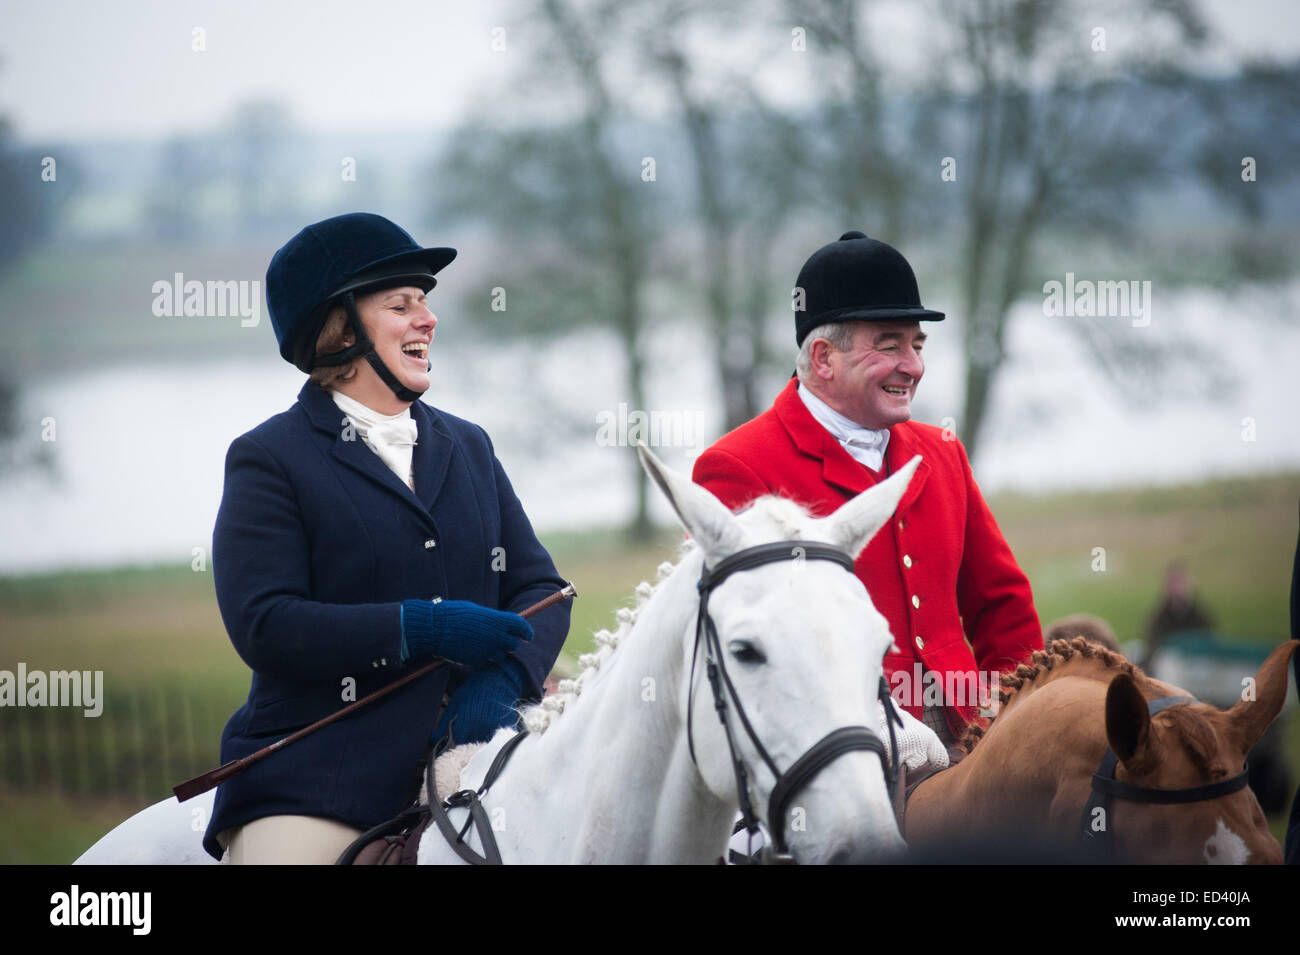 Hunters on horses laughing at a joke  Annual Boxing Day meet of the Meynell and South Staffs Hunt at Blethfield Hall, Staffordshire. Credit:  roger askew/Alamy Live News Stock Photo